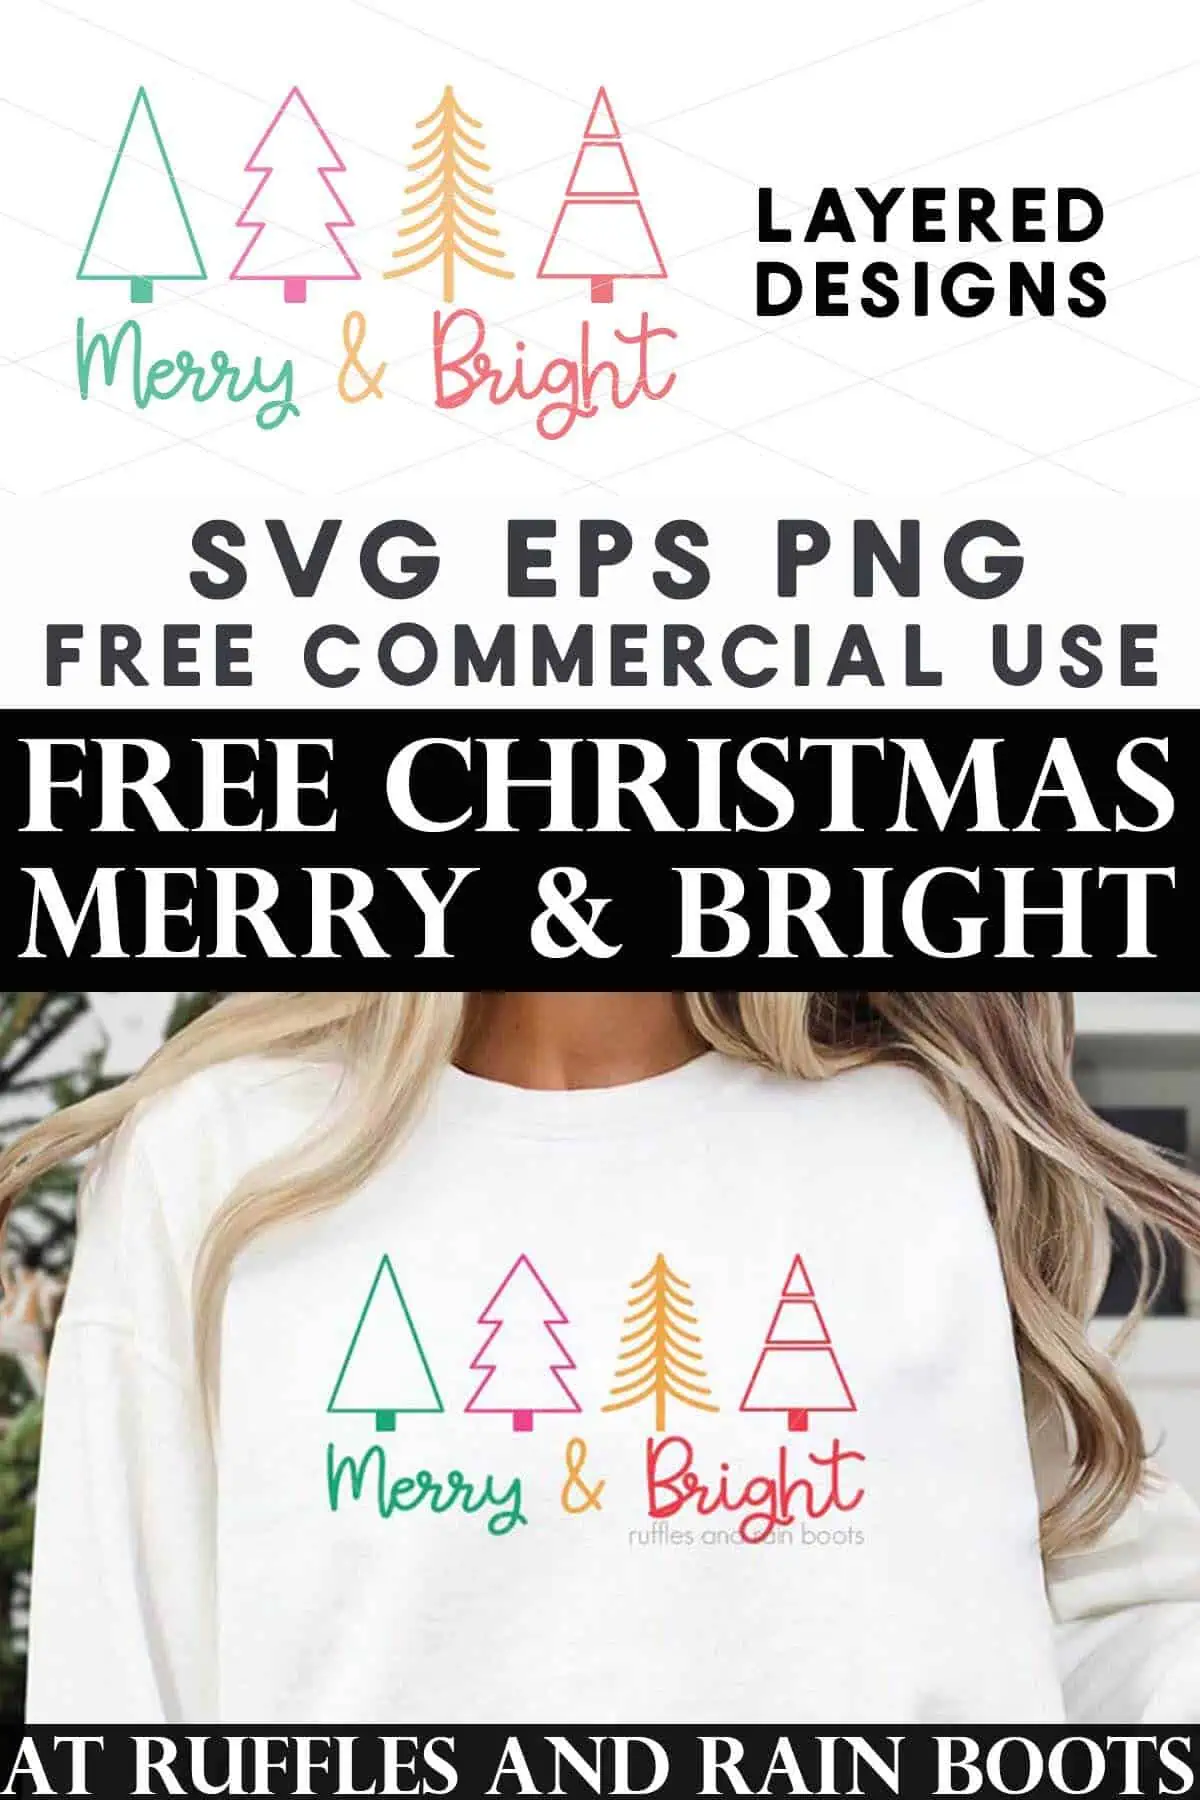 Split vertical image of woman wearing white sweatshirt which reads merry and bright with holiday trees and text which reads free Christmas SVG merry and bright.